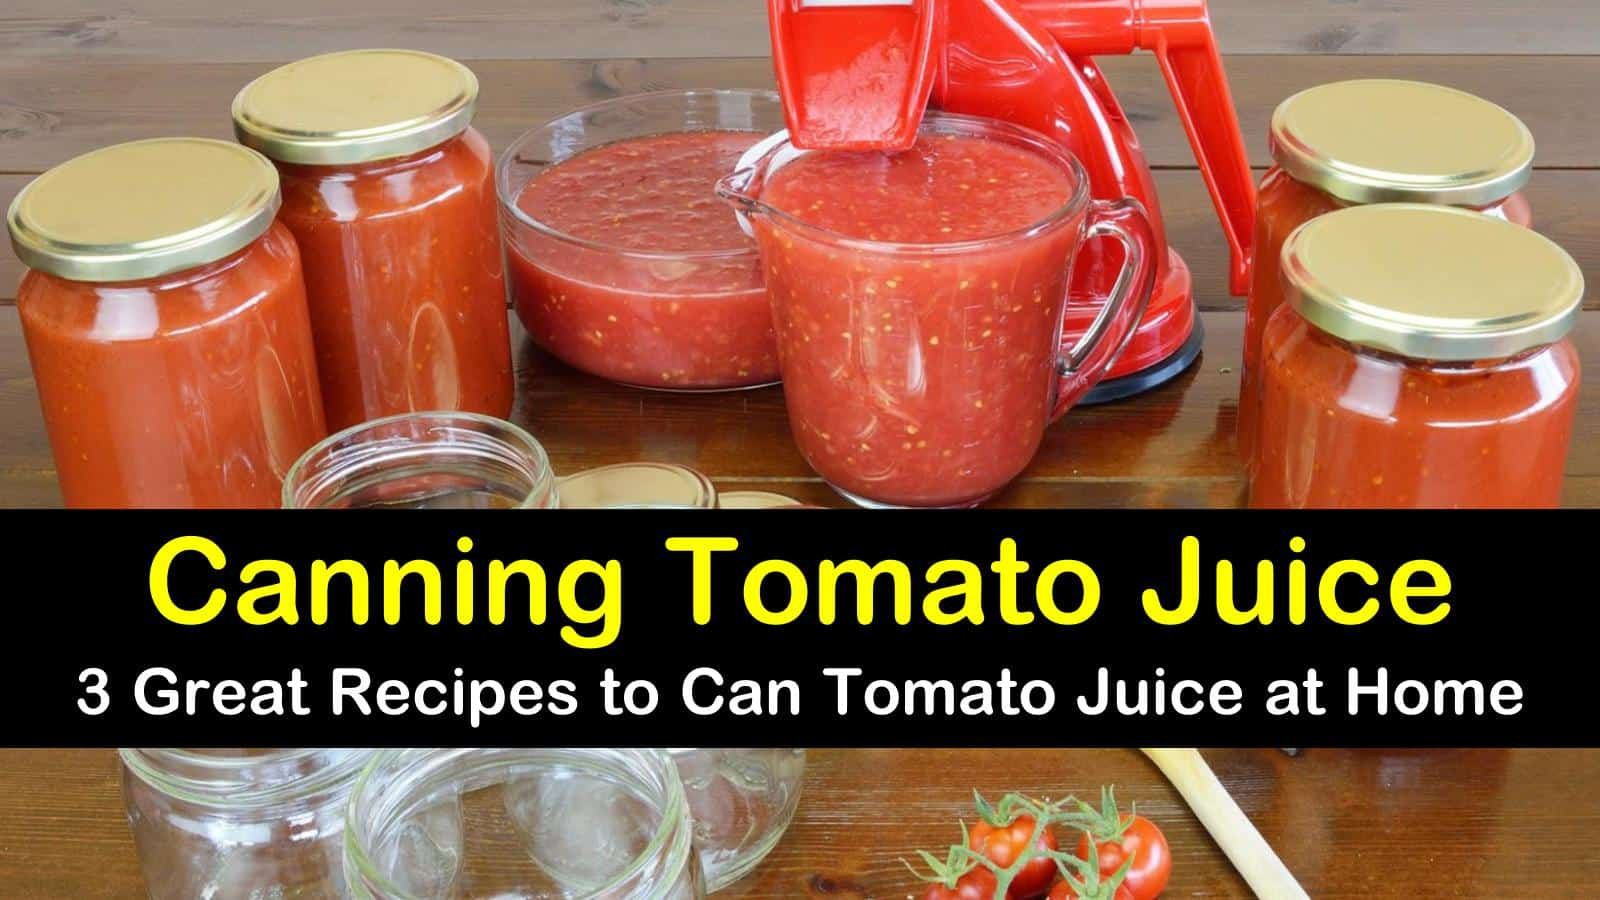 Canning Tomato Juice
 Canning Tomato Juice 3 Great Recipes to Can Tomato Juice